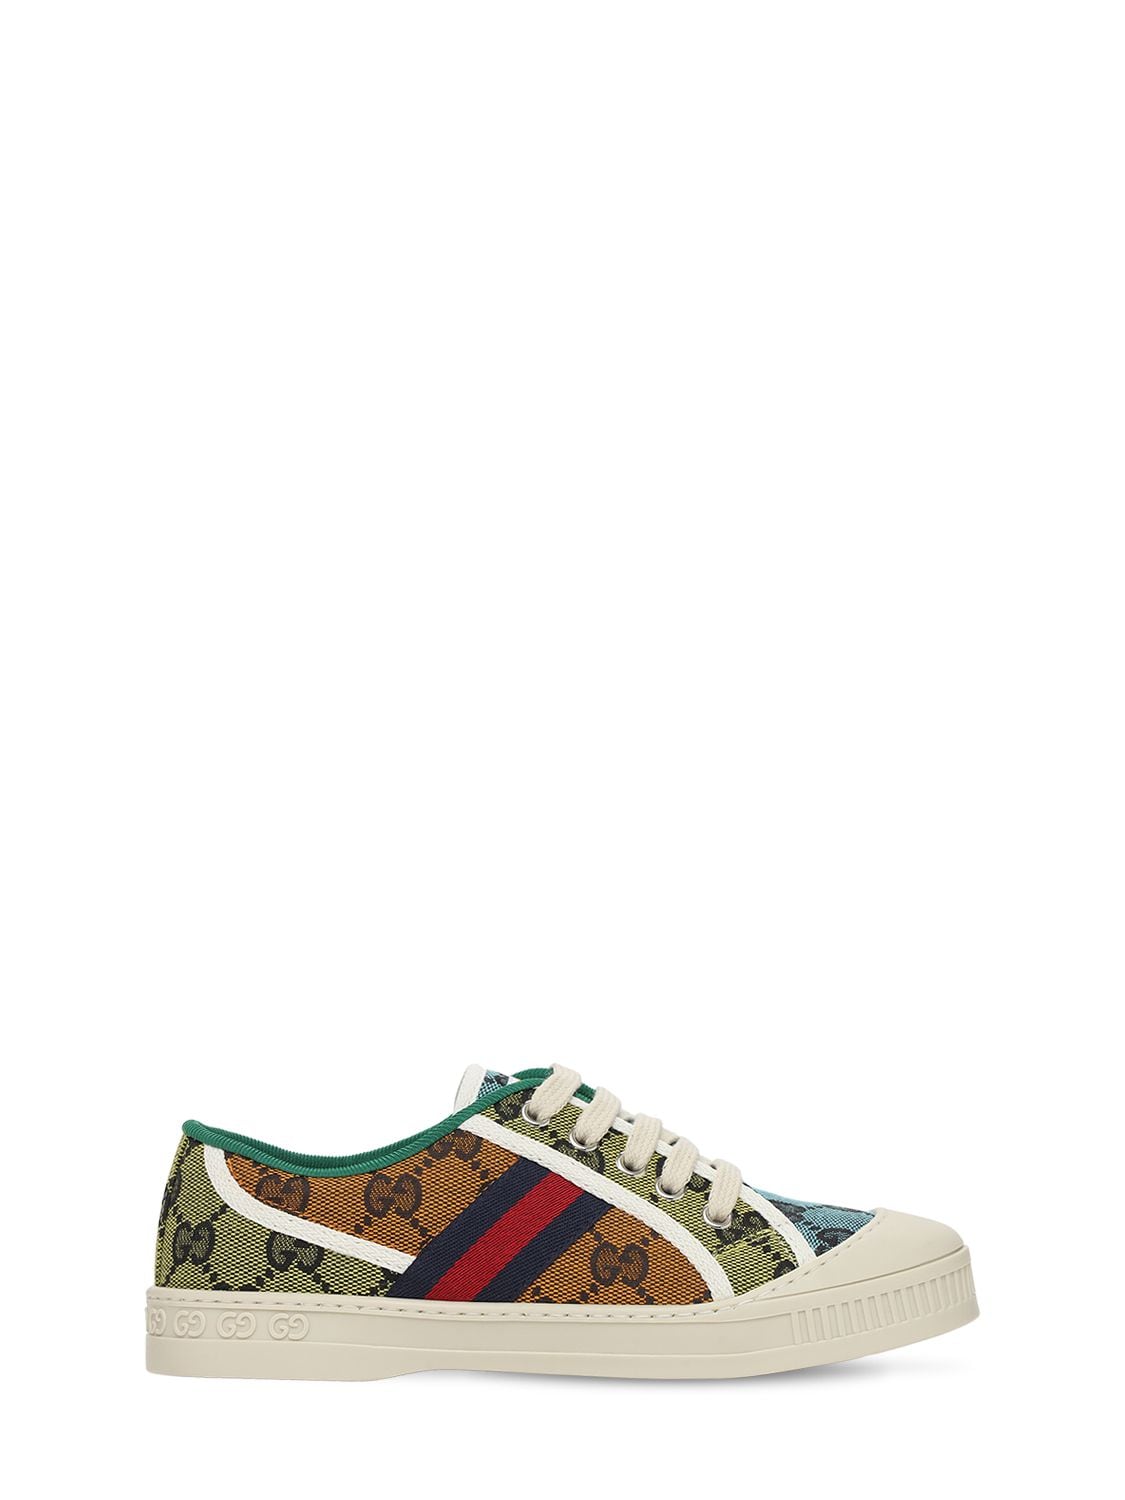 Gucci Kids' Gg Canvas & Leather Sneakers In Multicolor